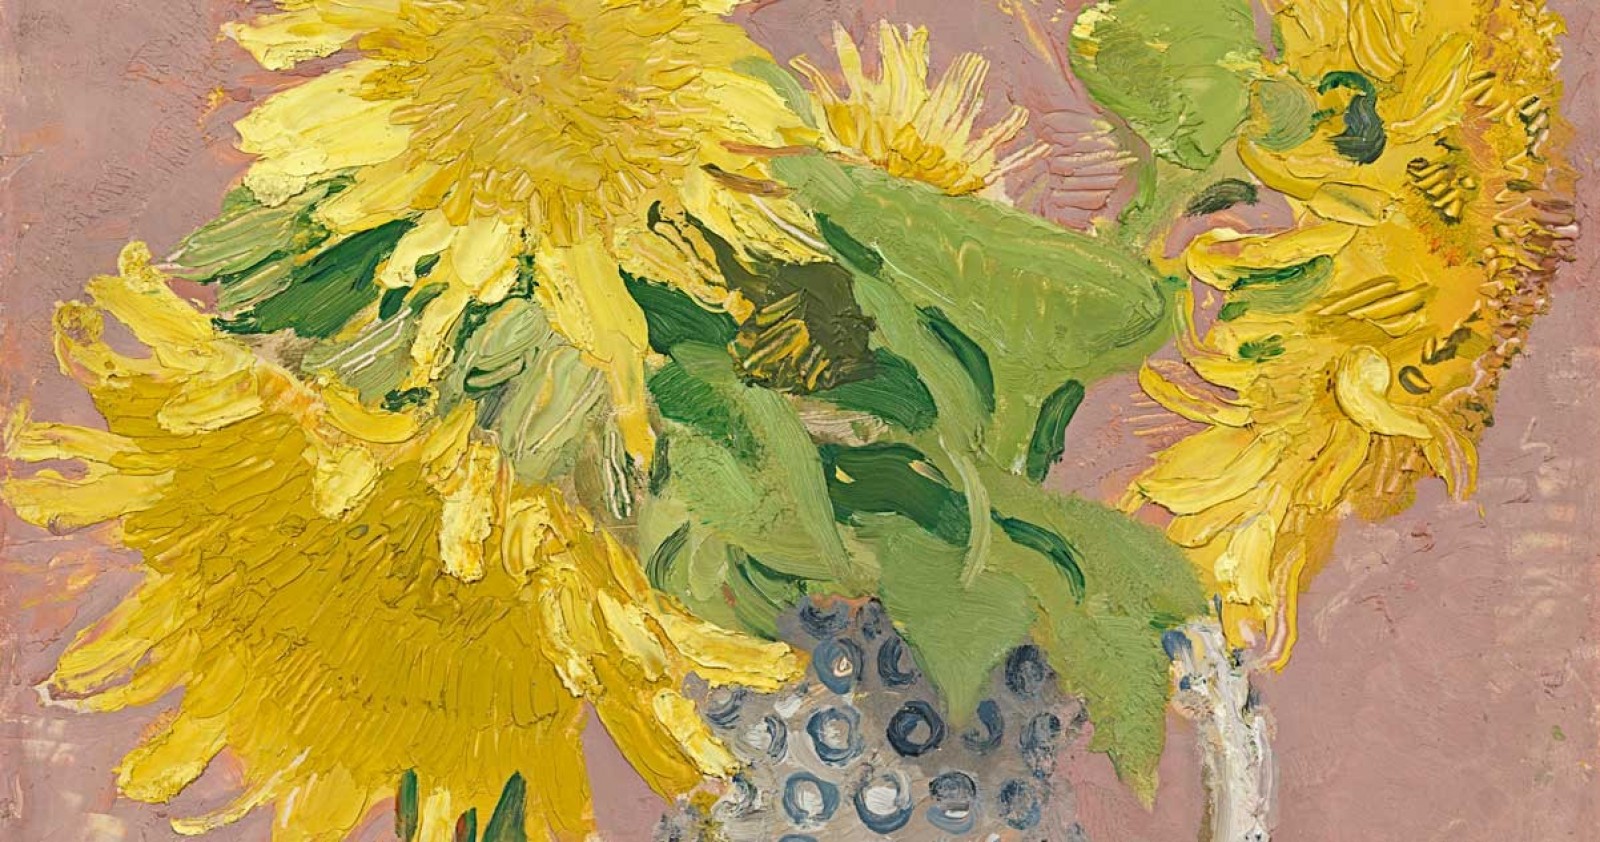 Sunflowers and Apples at Tate Britain